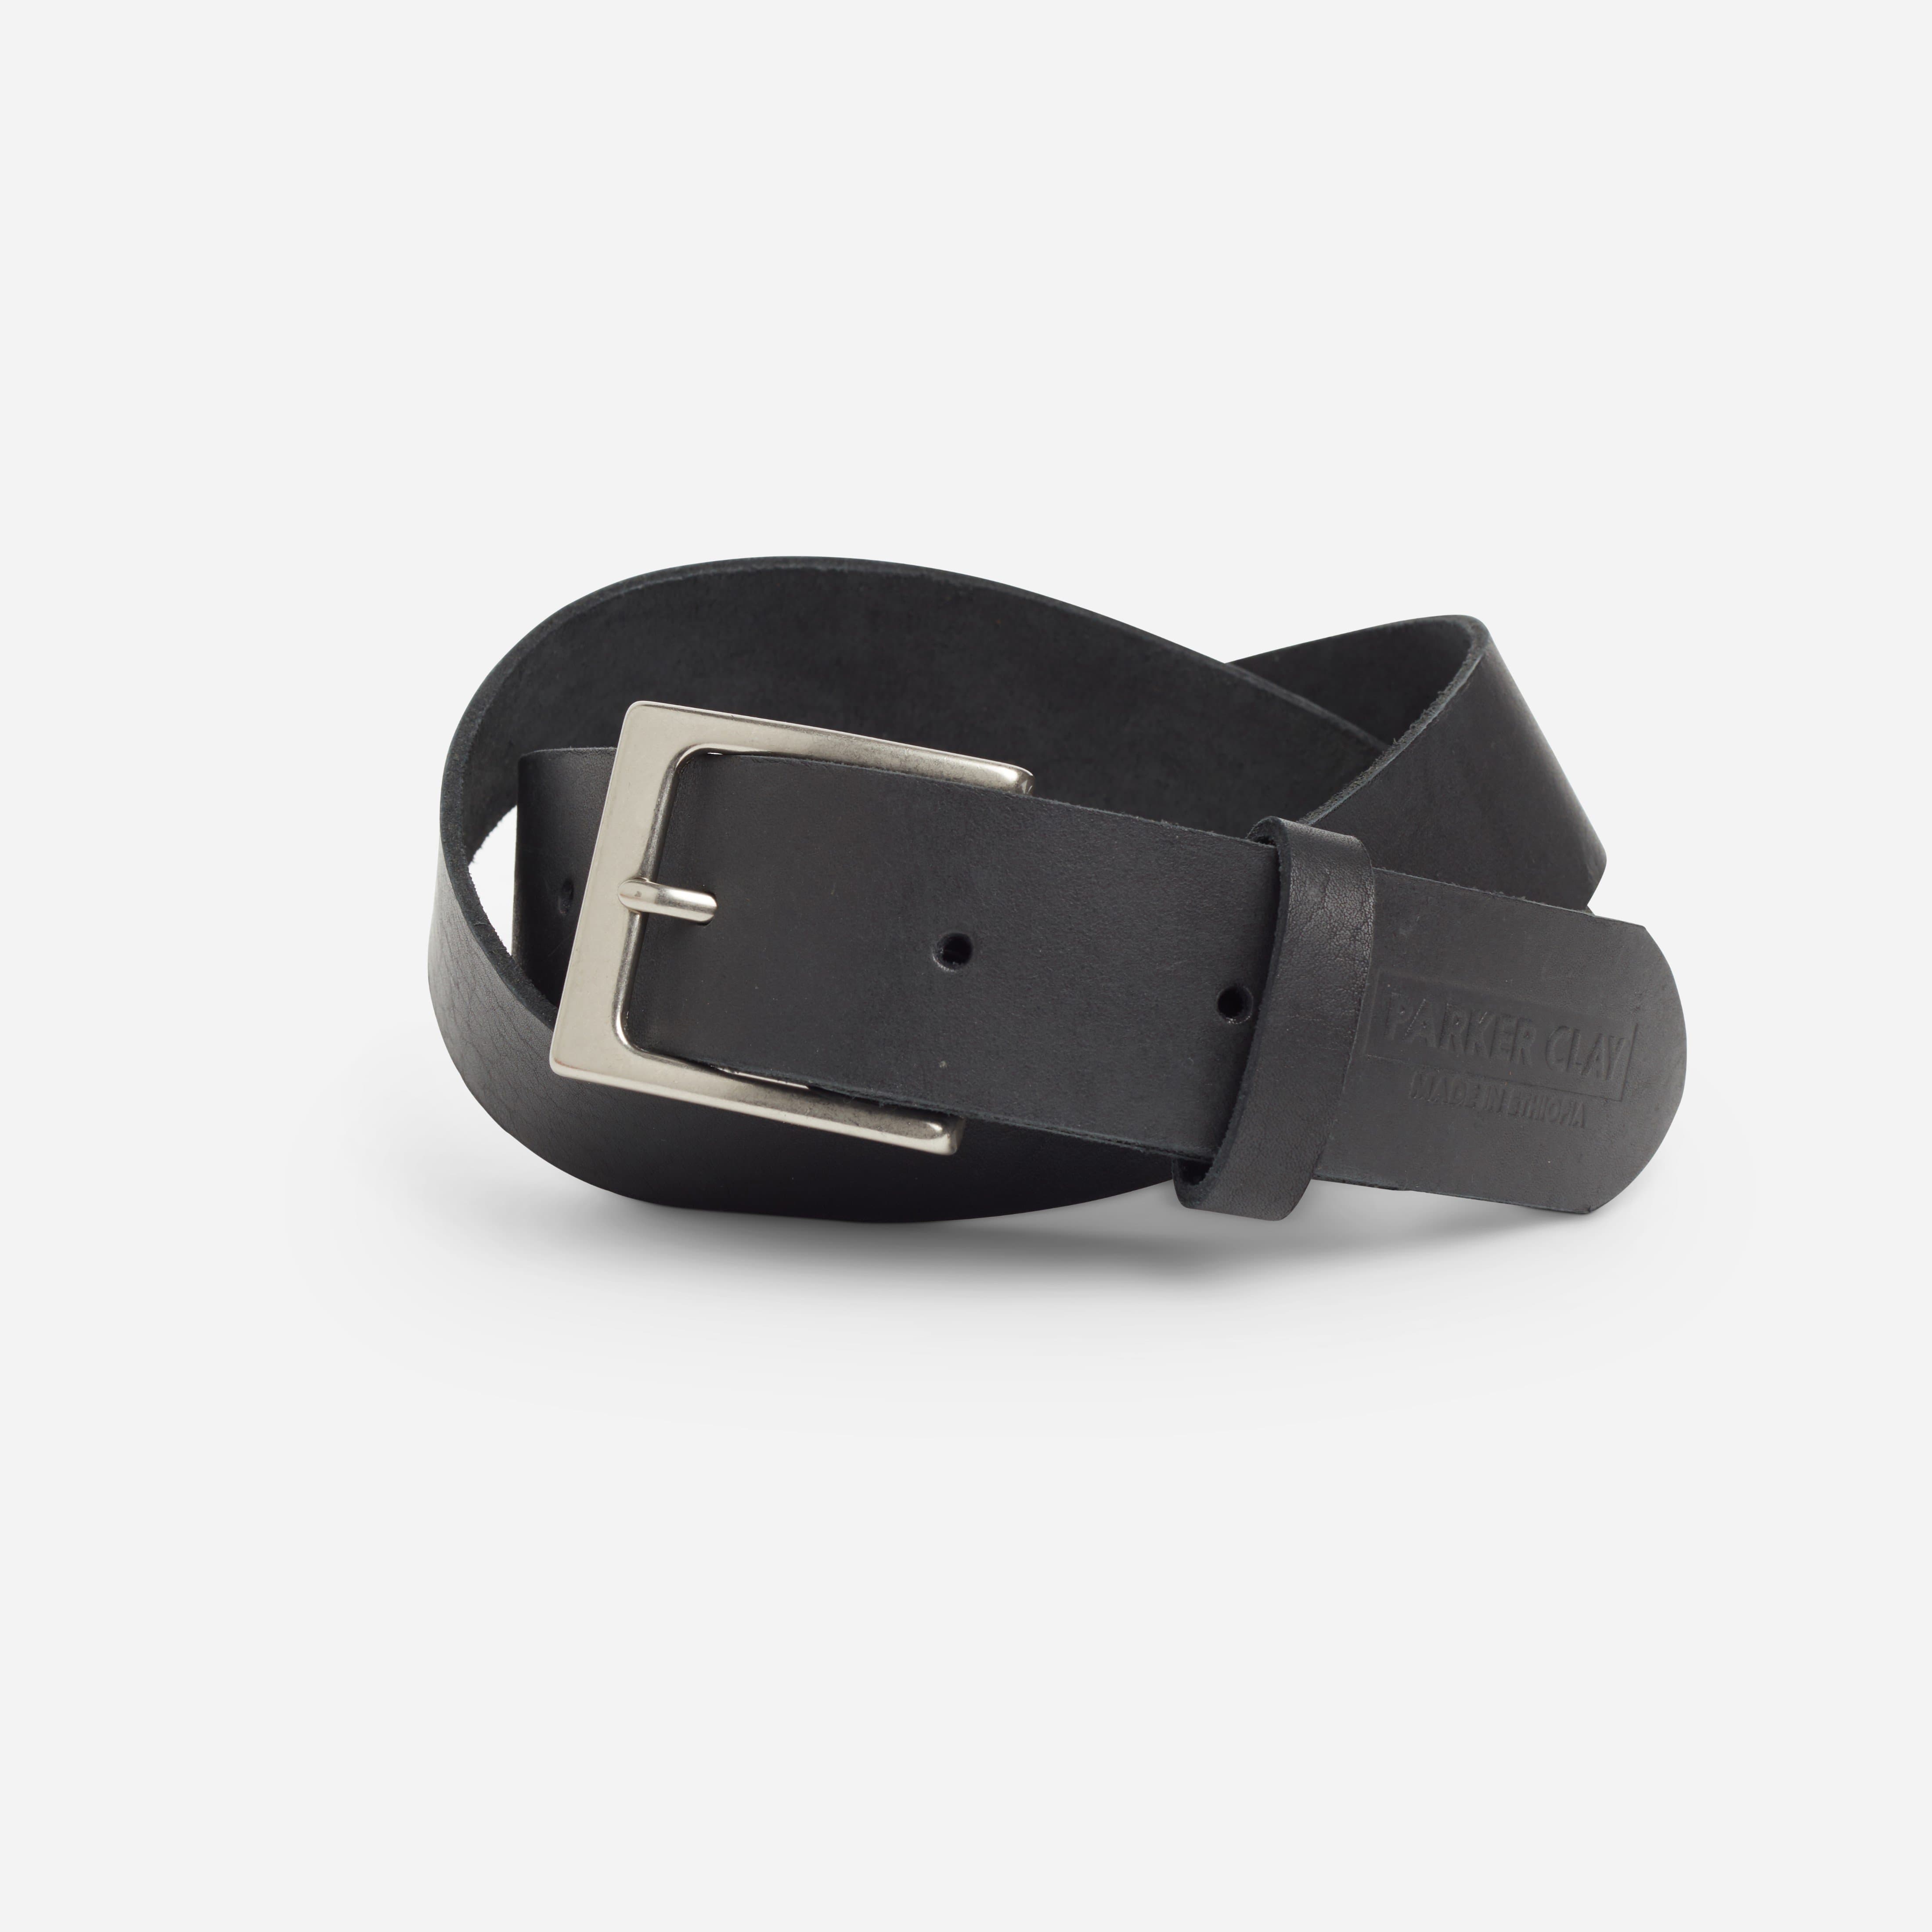 Parker Clay Ethically Crafted Leather Shoulder Strap